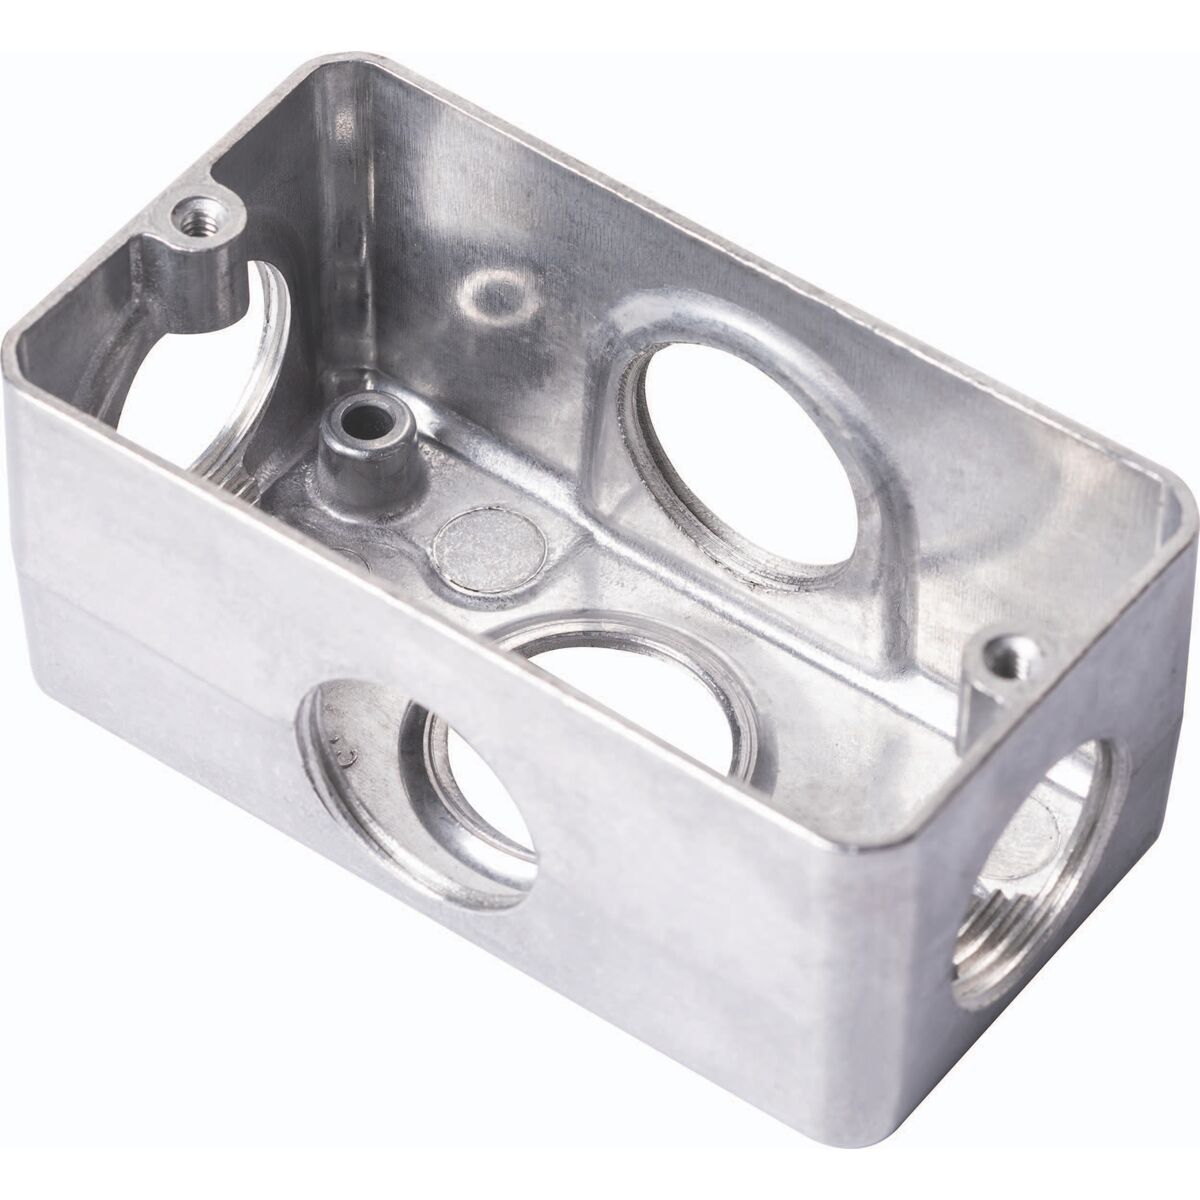 
Tramontina 3/4" X-Type Multiple Conduit Box without Cover
